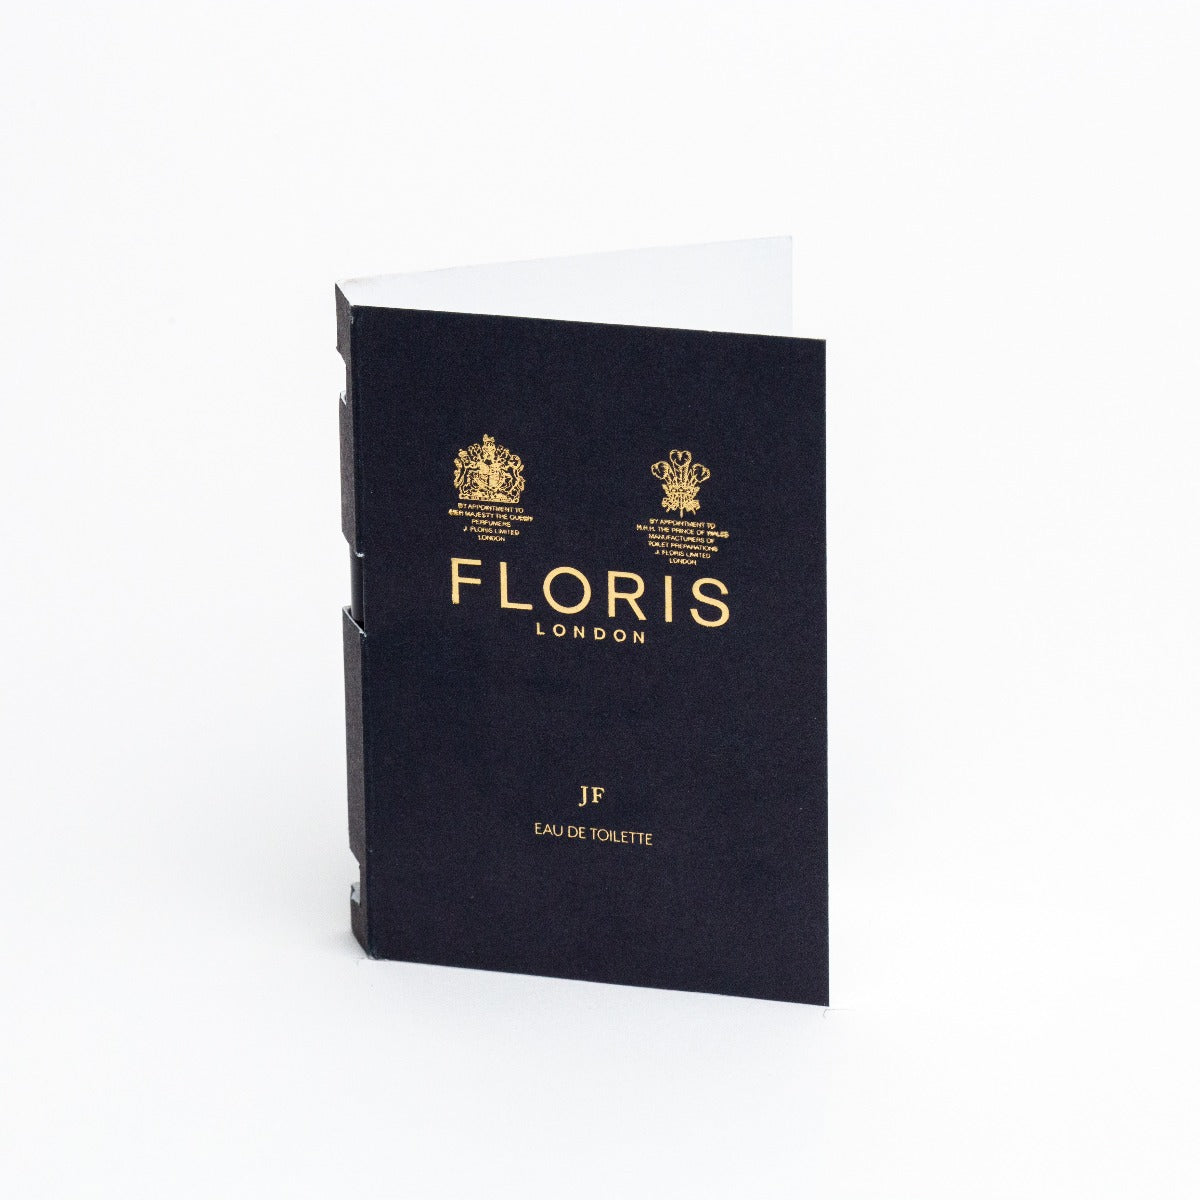 A black book with the logo of KirbyAllison.com on it showcasing FLORIS JF EDT Sample Vial's world's best scents.